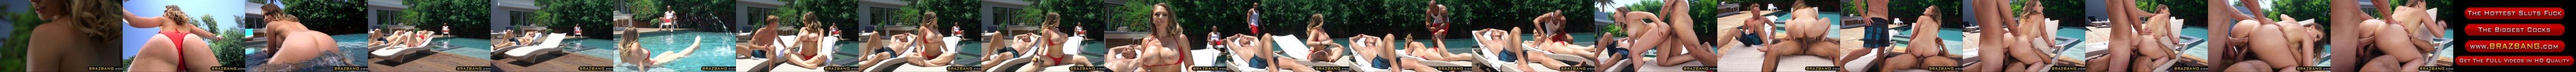 Www Brazbang Com - Wife Dped On Her Honeymoon In An All Inclusive Resort â€” vPorn